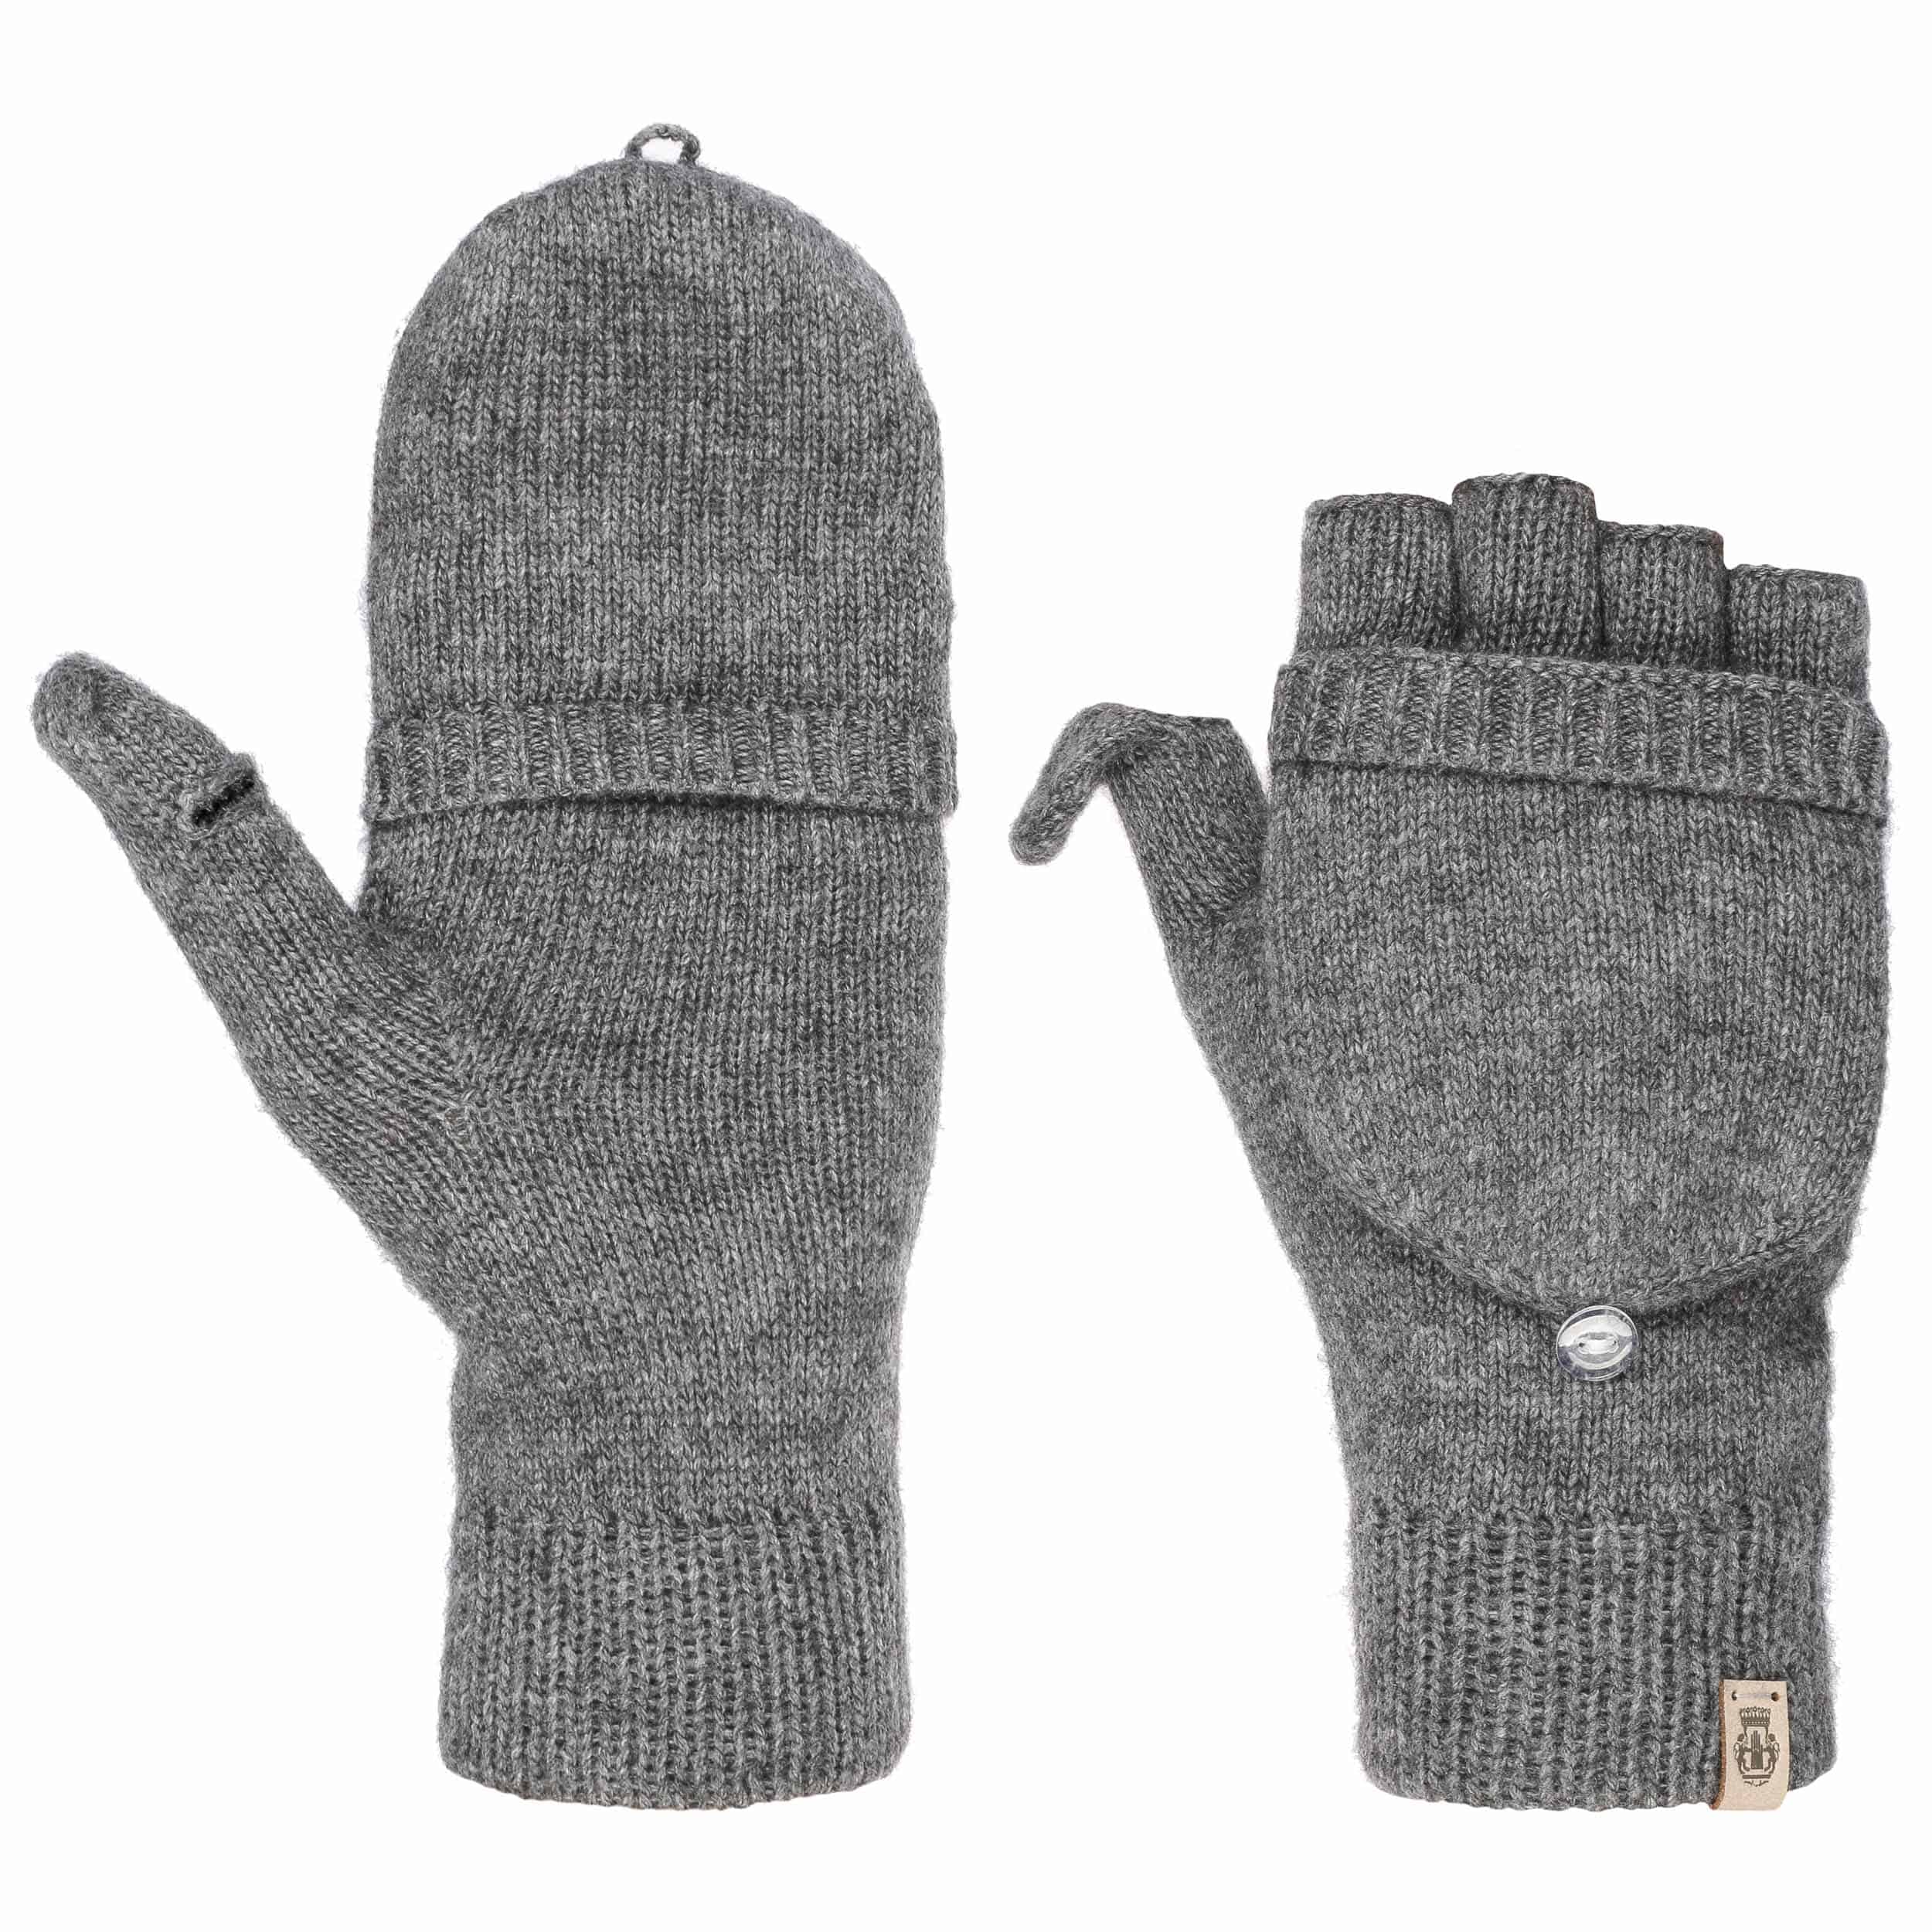 fingerless gloves with cover